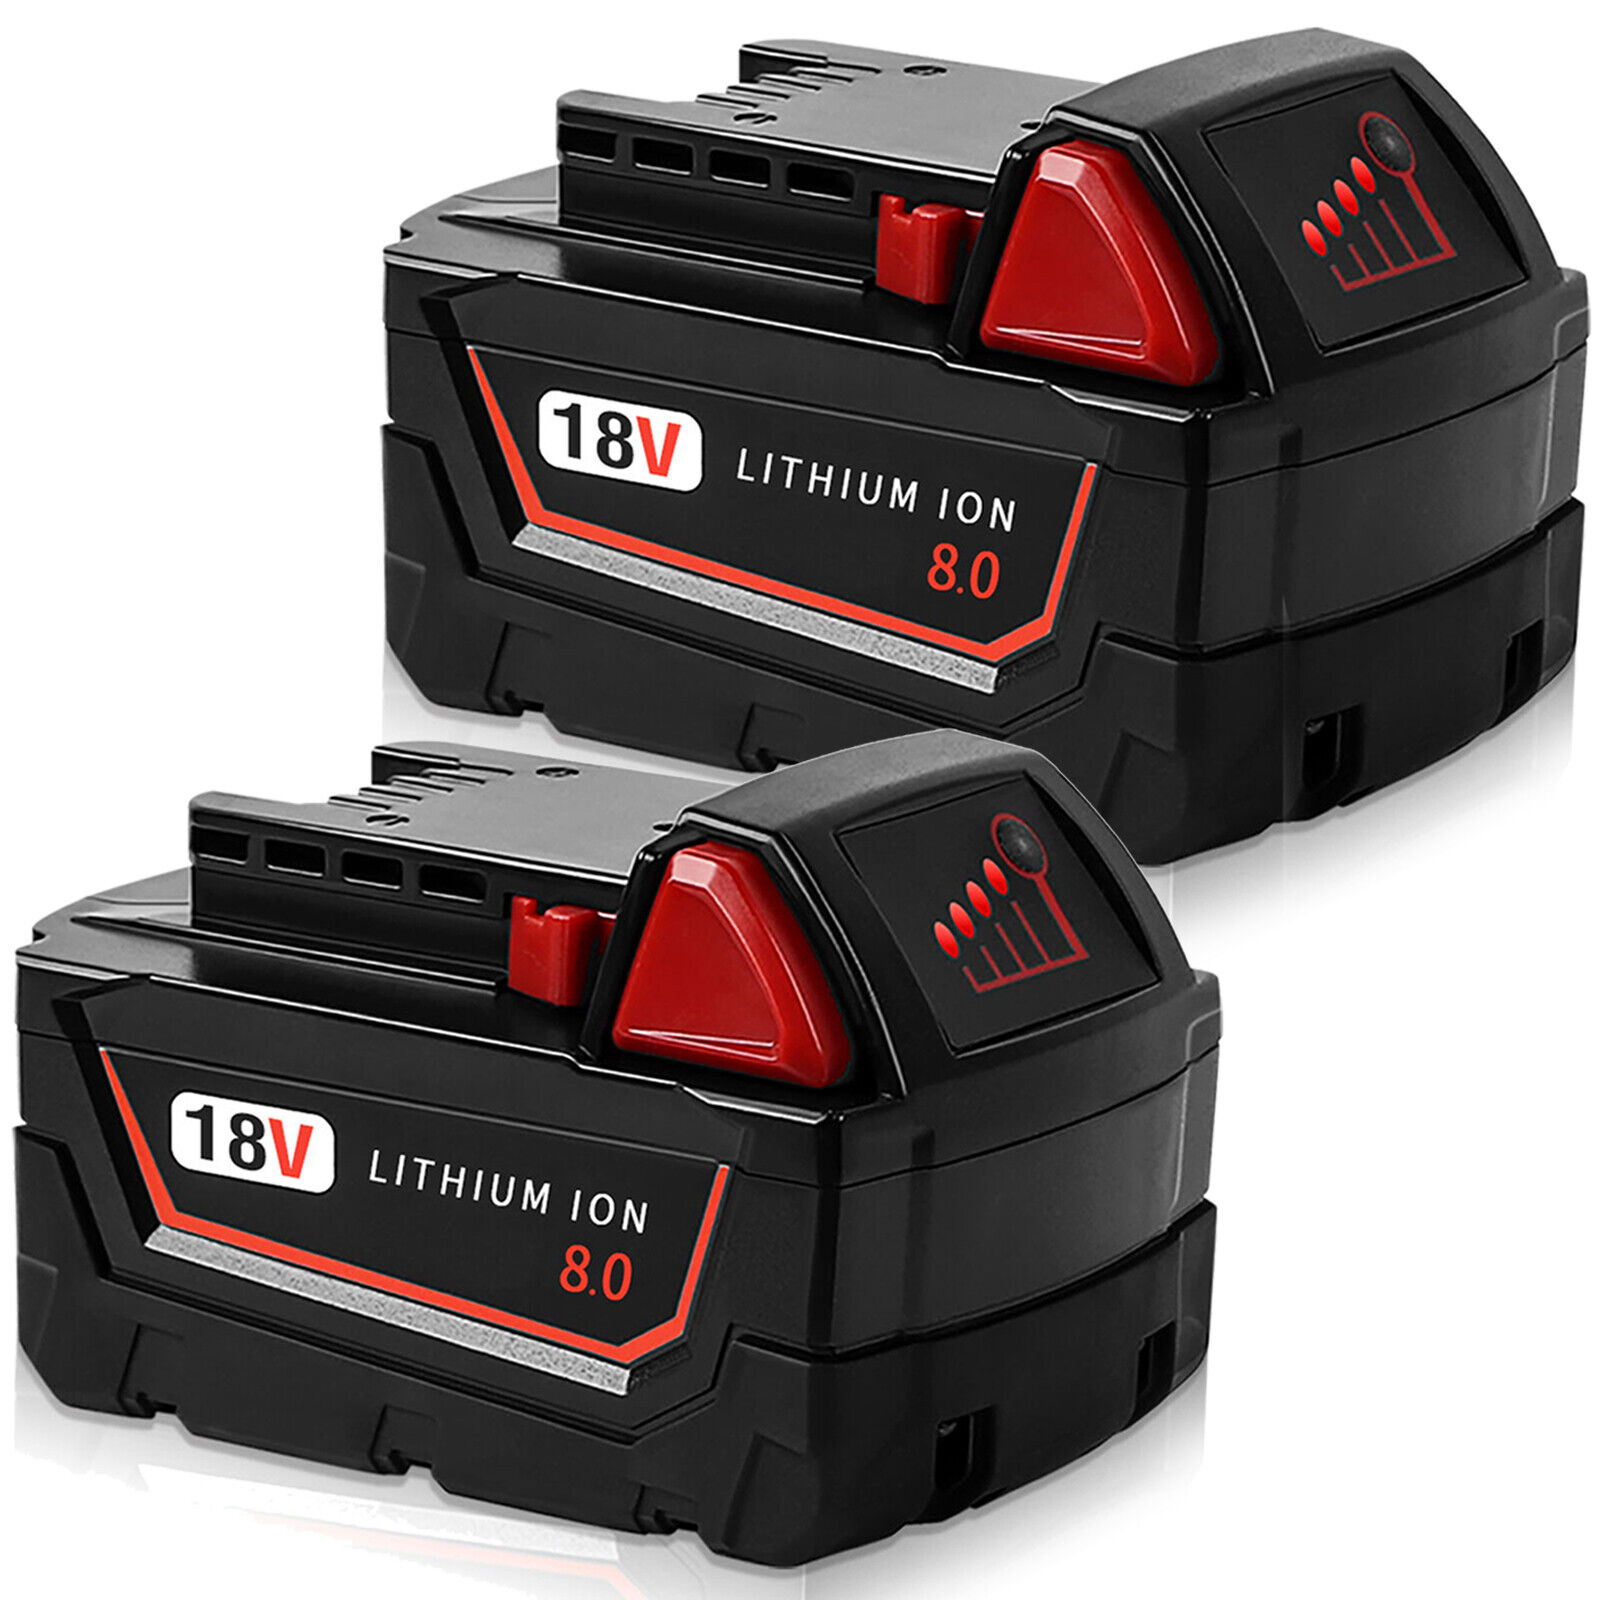 2x For Milwaukee M18 18V Lithium XC 8.0 AH Extended Capacity Battery 48-11-1850 For Milwaukee Does Not Apply - фотография #2